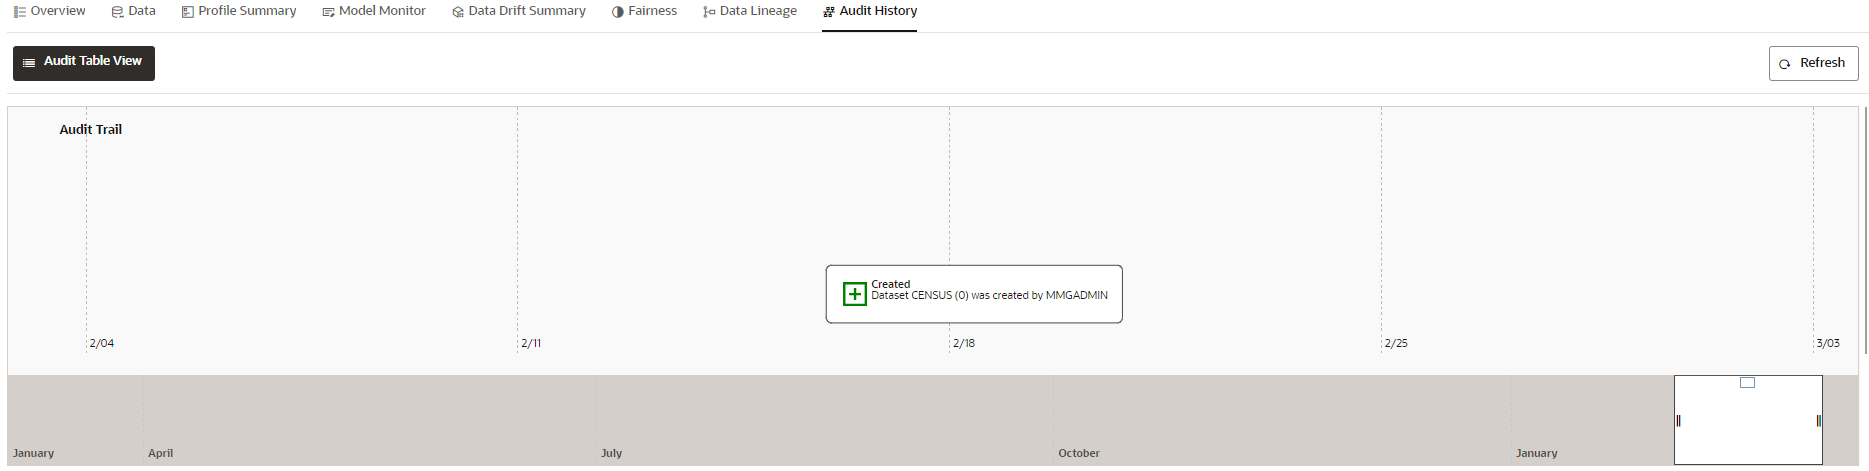 This image displays the Audit History window Timeline View with Horizontal Time Axis.